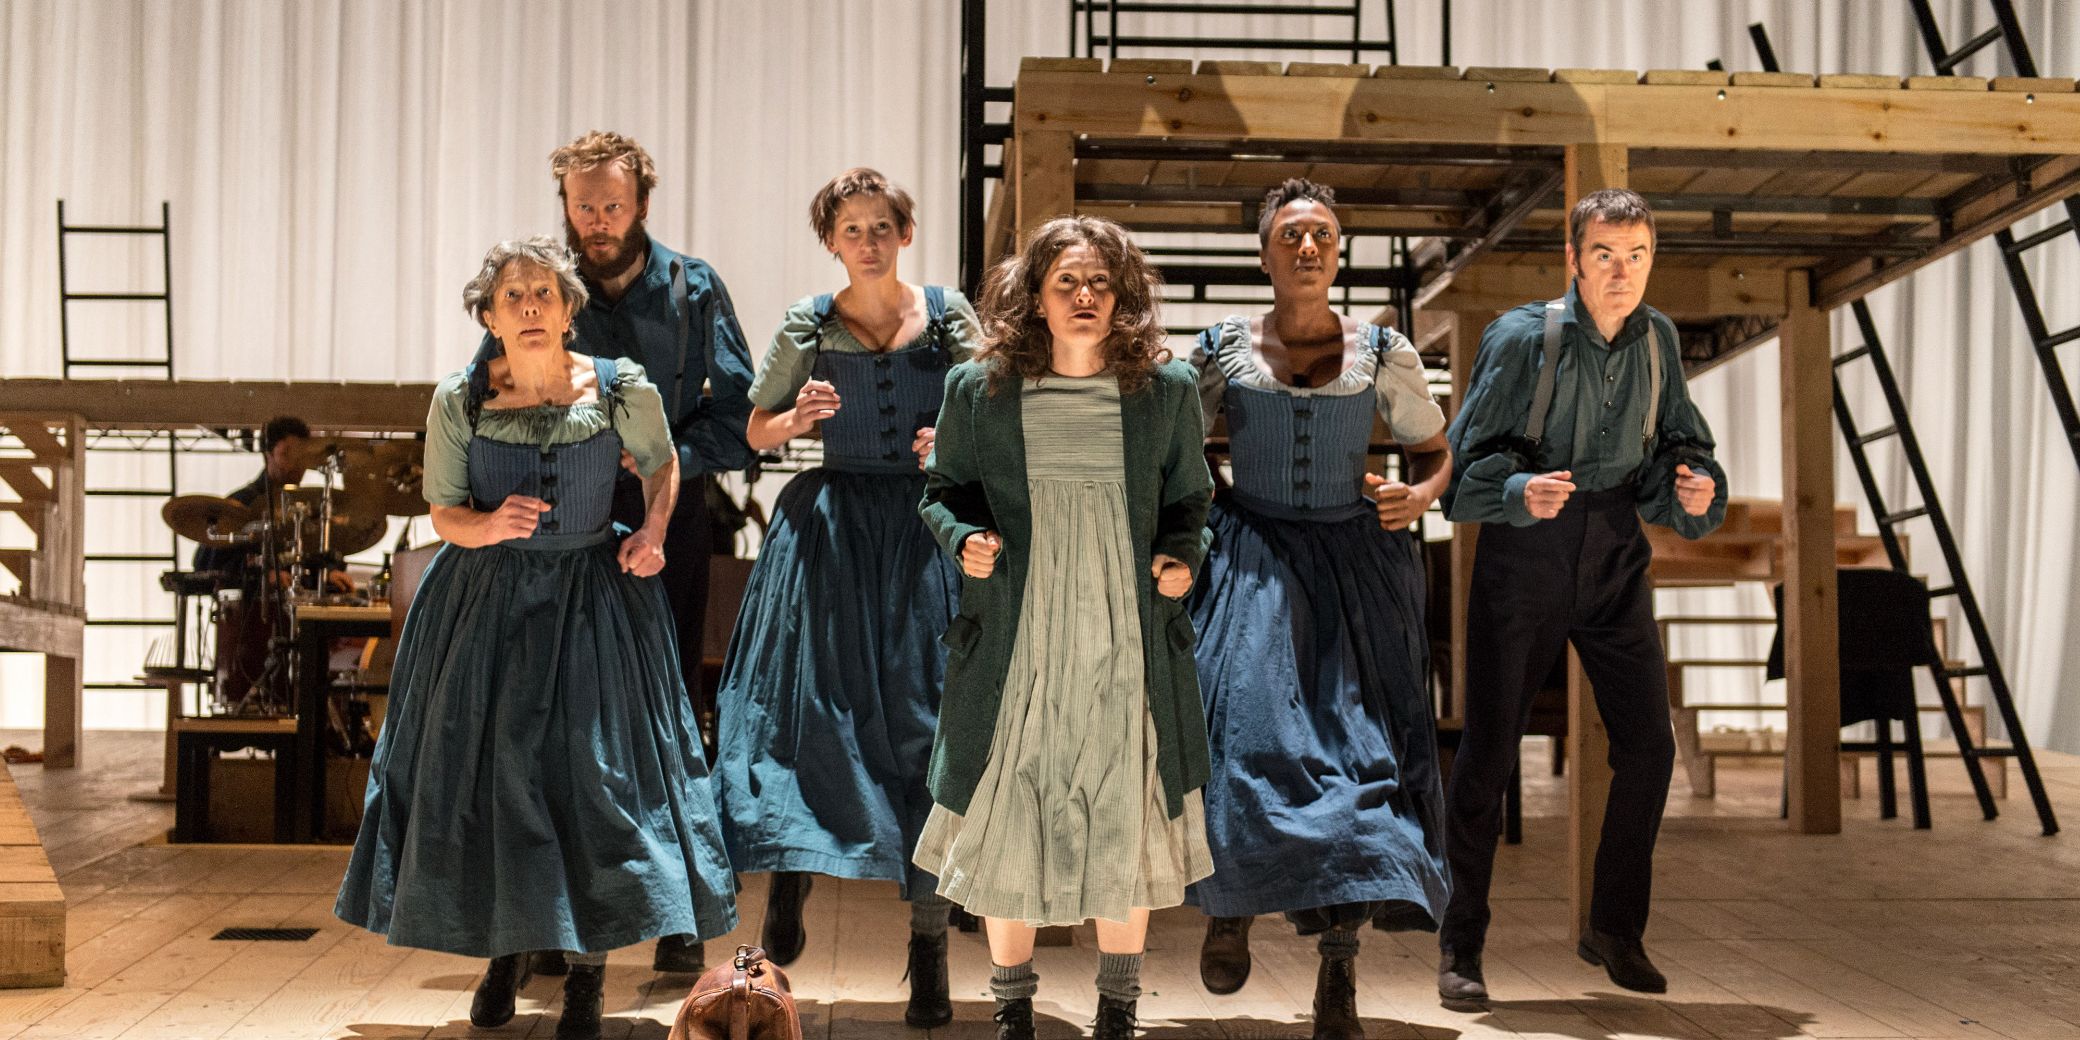 Cast members walking in place in front of platforms with steps and ladders attached in the Jane Eyre 2015 UK National Theater production